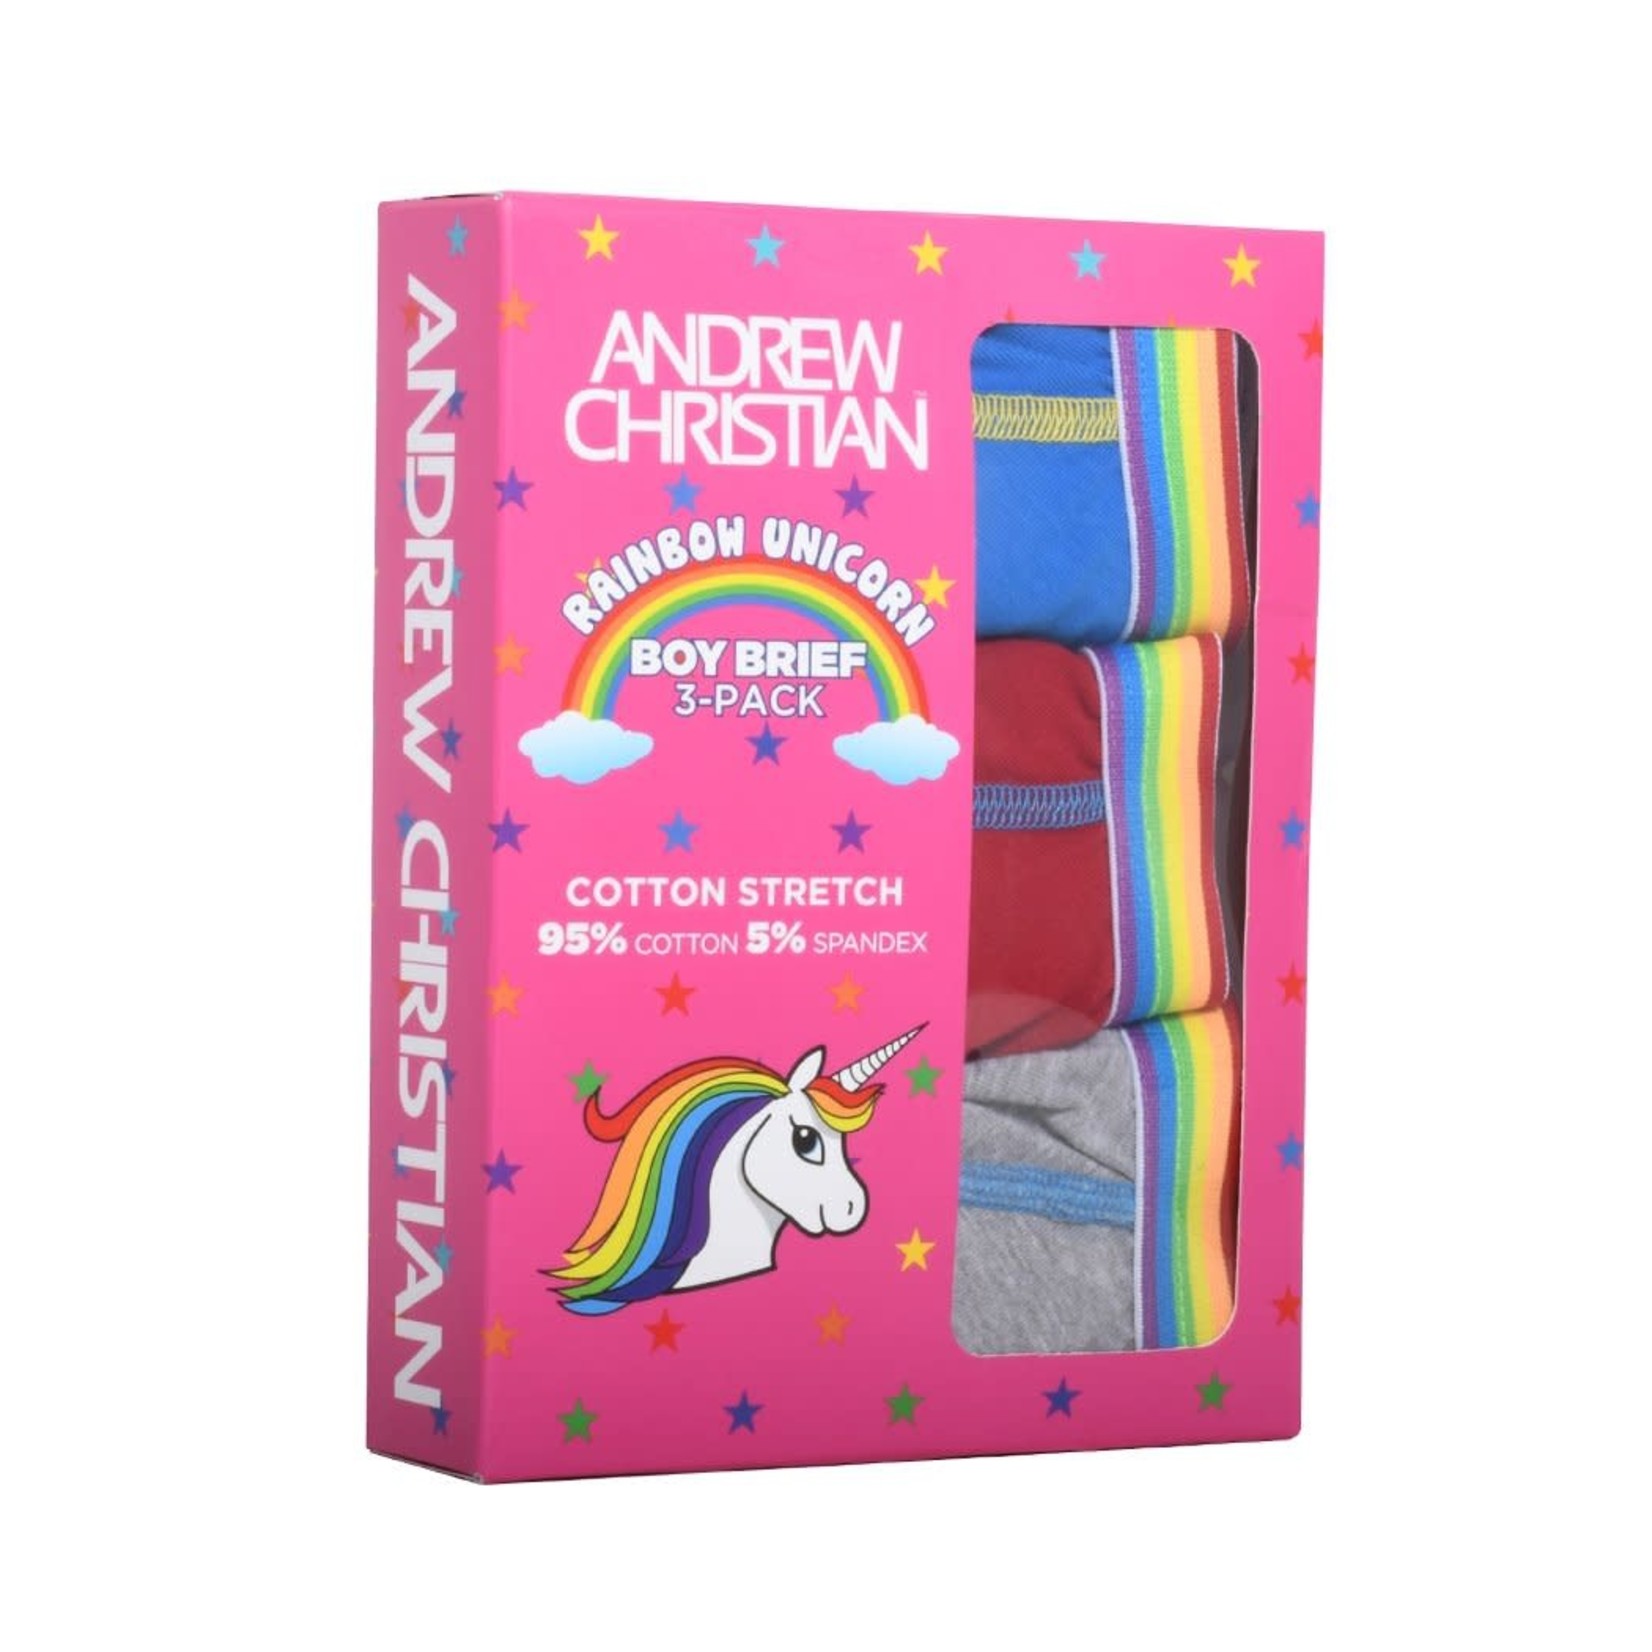 ANDREW CHRISTIAN ANDREW CHRISTIAN - BOY BRIEF UNICORN 3-PACK - RED/BLUE/HEATHER - SMALL